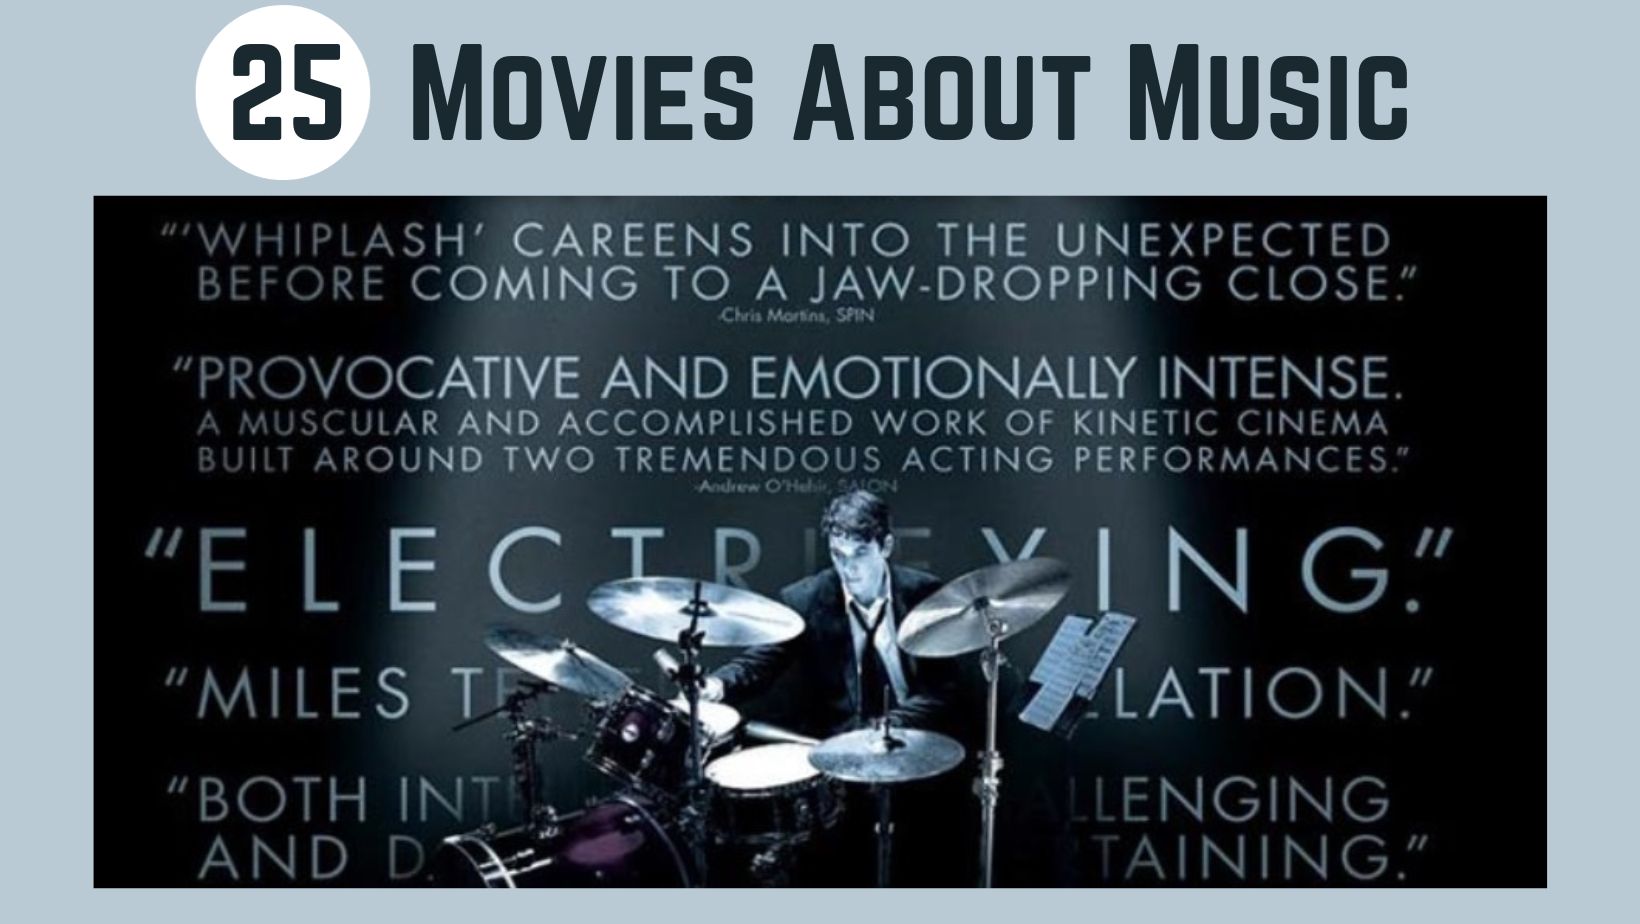 image from movie 'whiplash' in dark blue and light blue colors. text "25 movies about music"